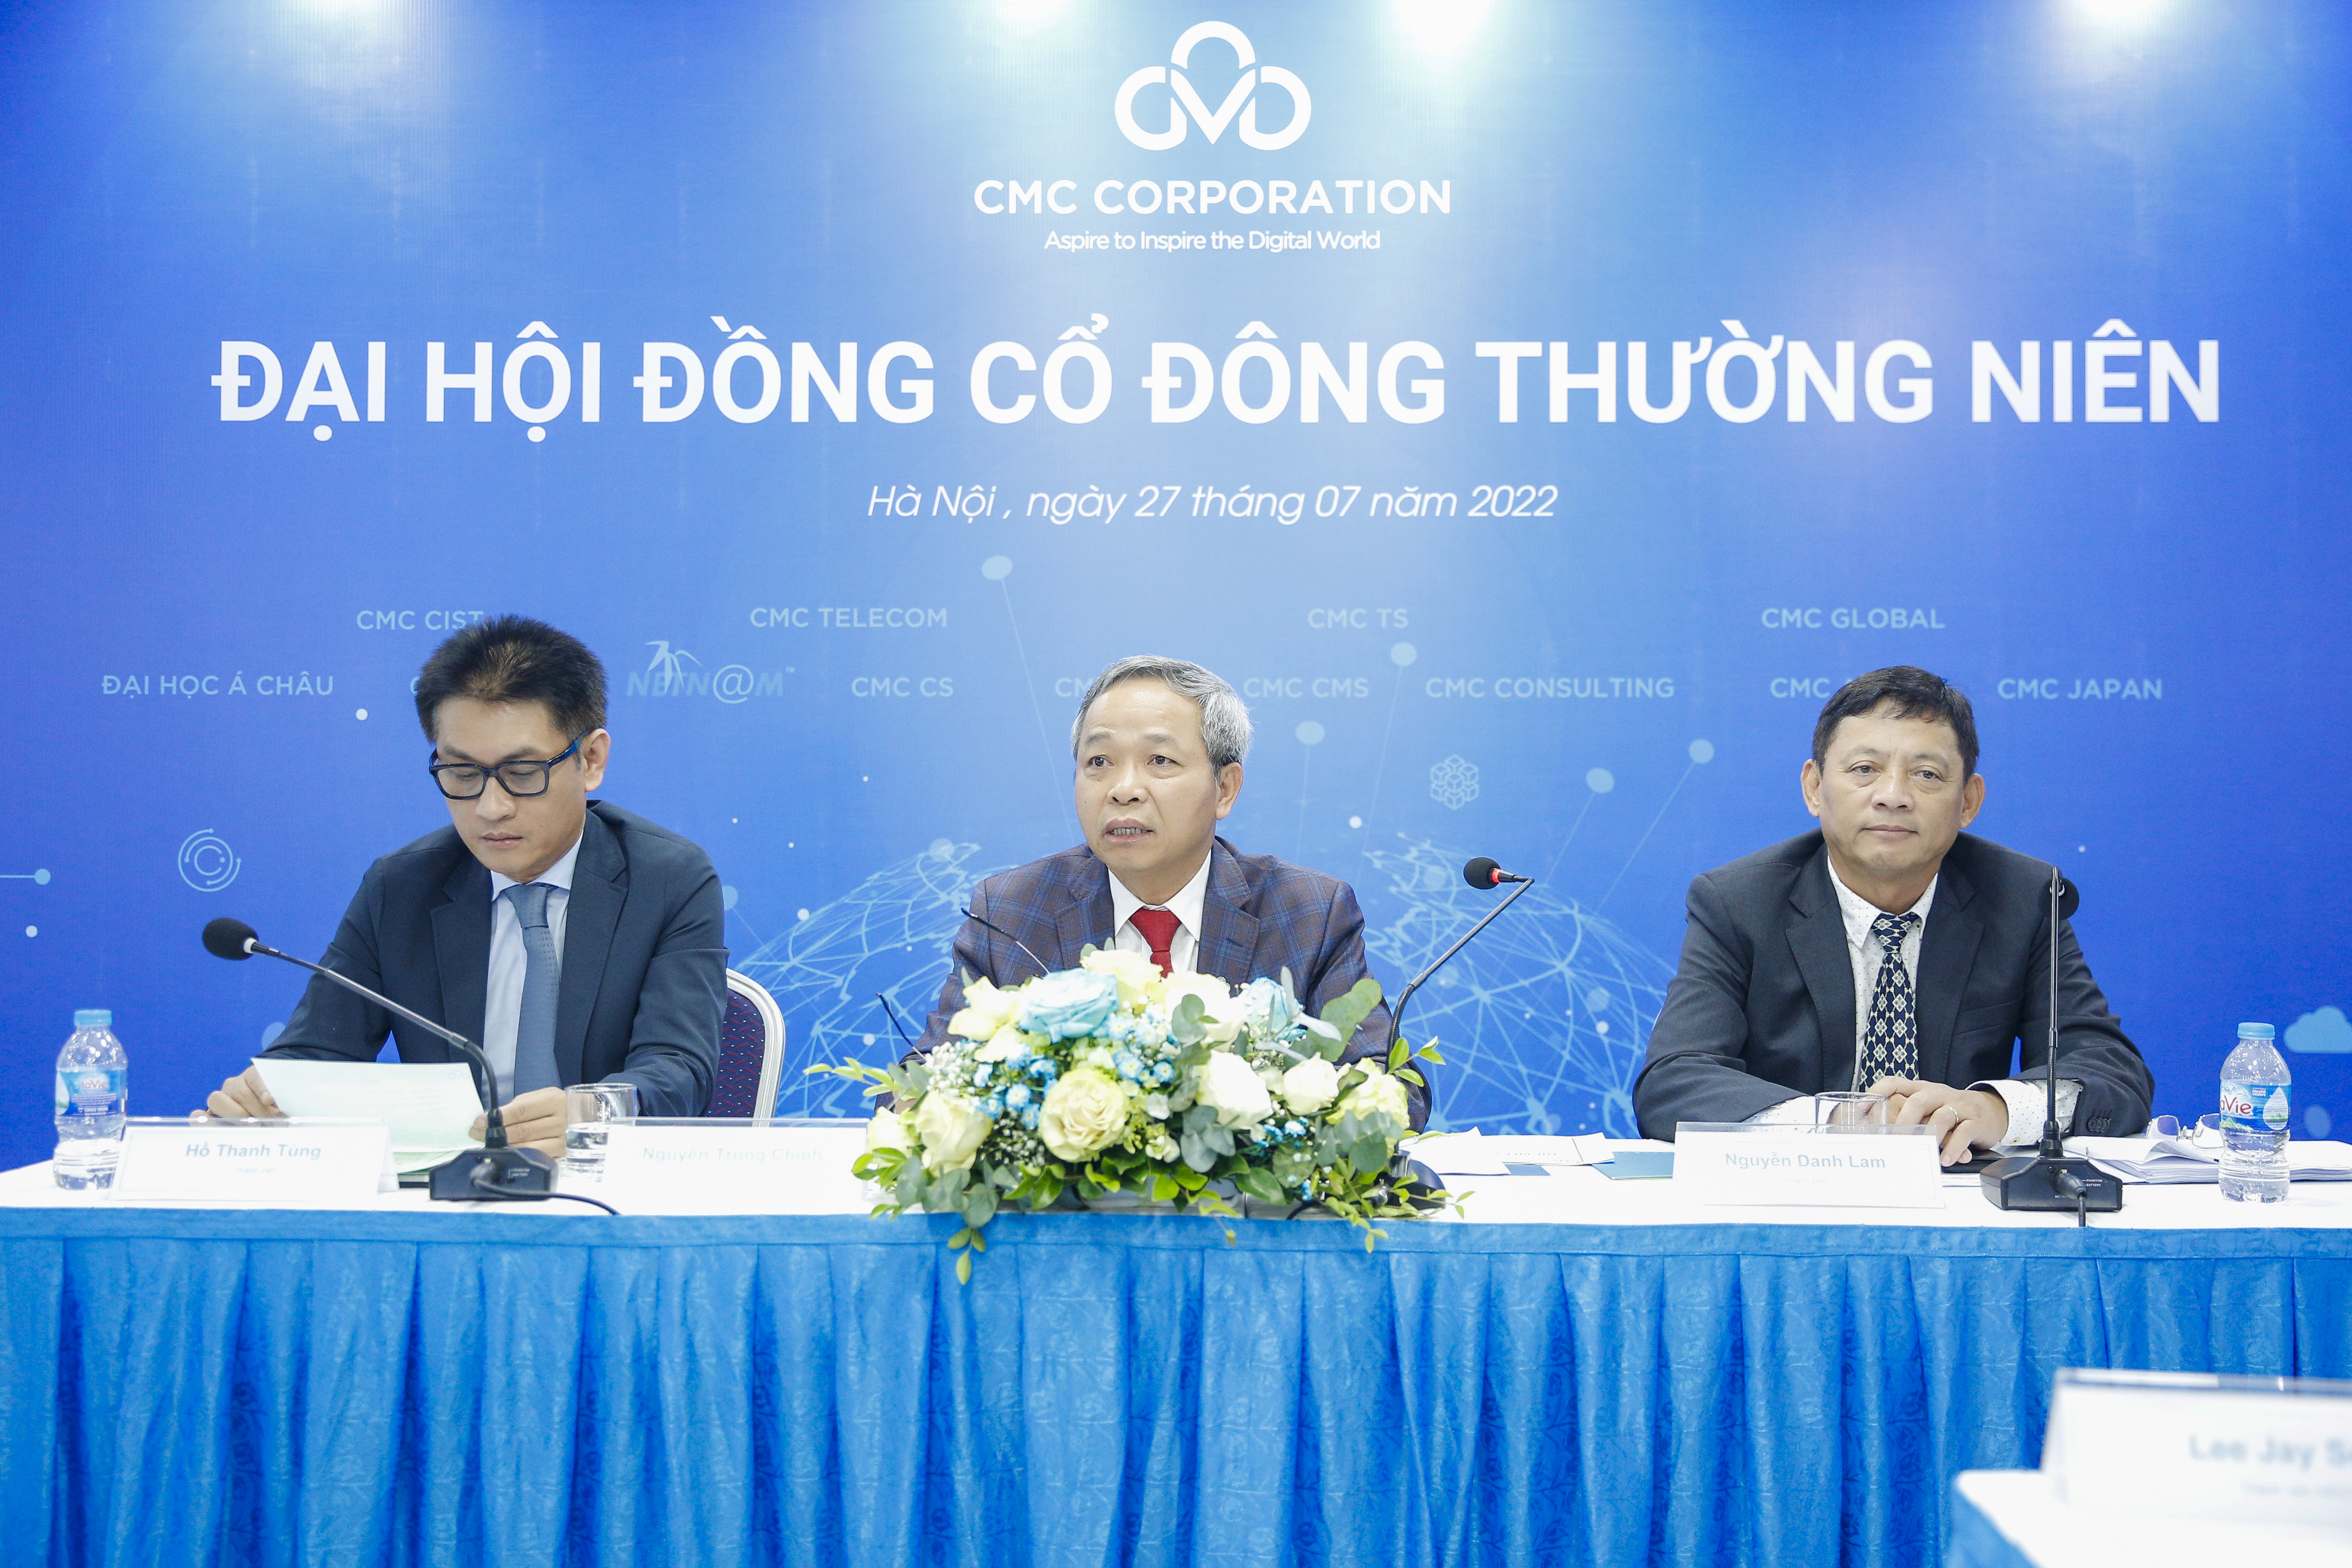 CMC Corporation successfully holds the 2022 Annual General Meeting of Shareholders